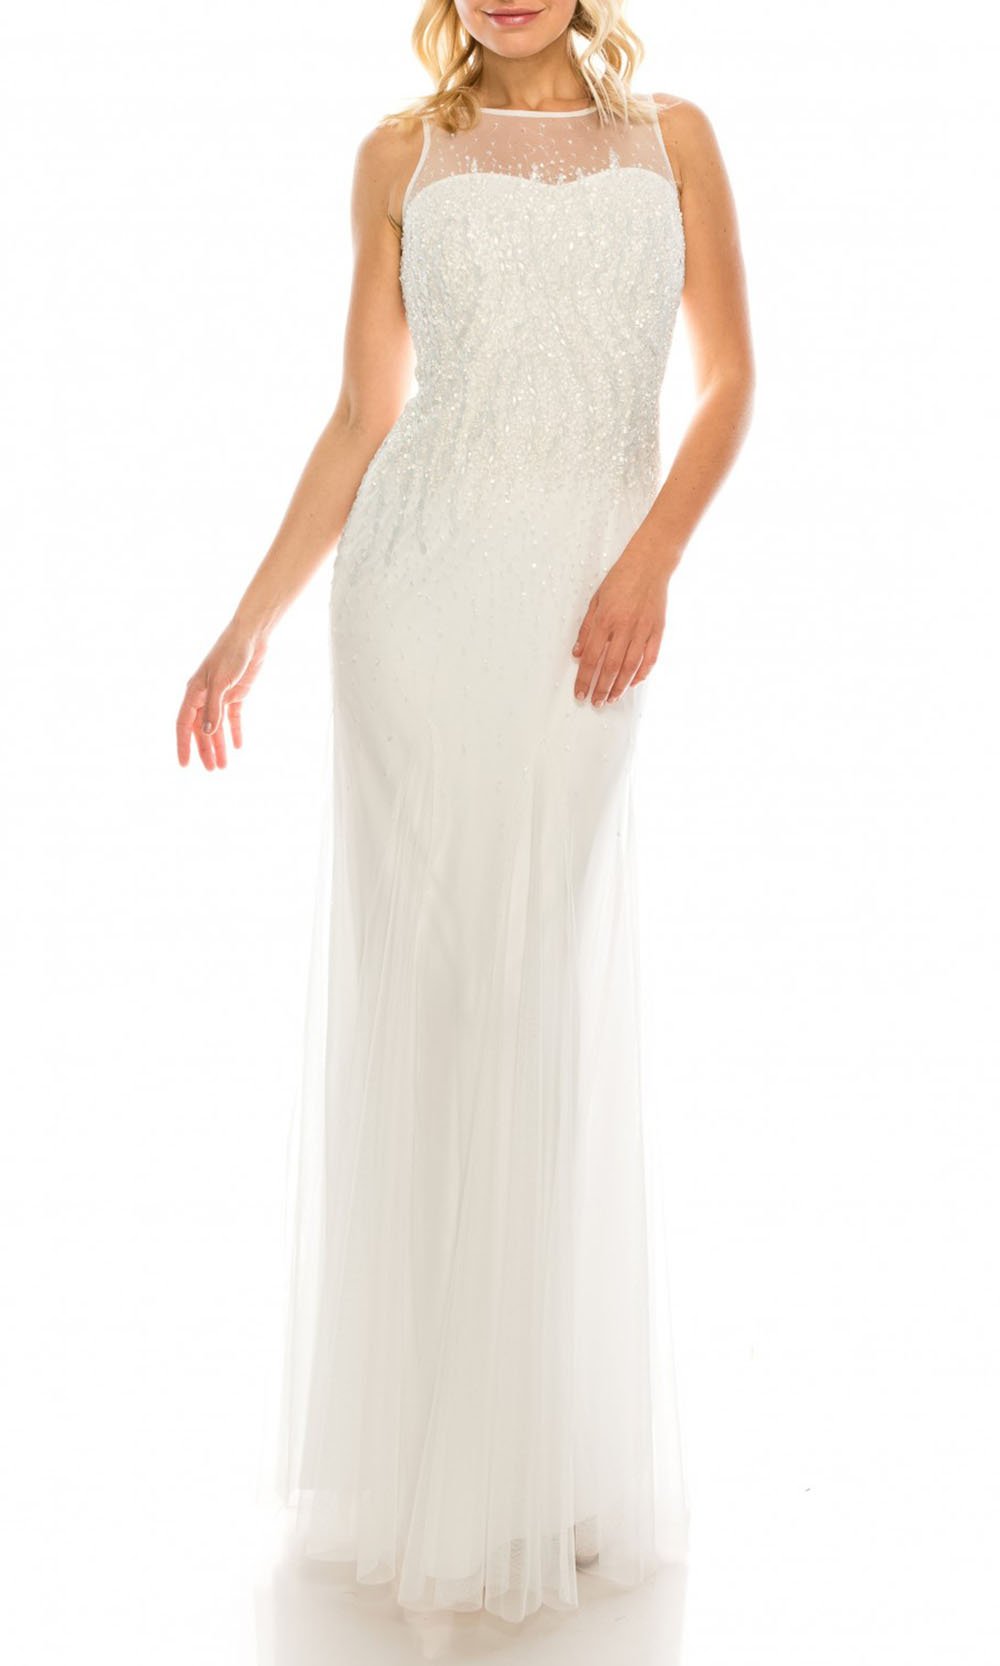 Adrianna Papell - 91892190 Beaded Illusion Neck Dress In White